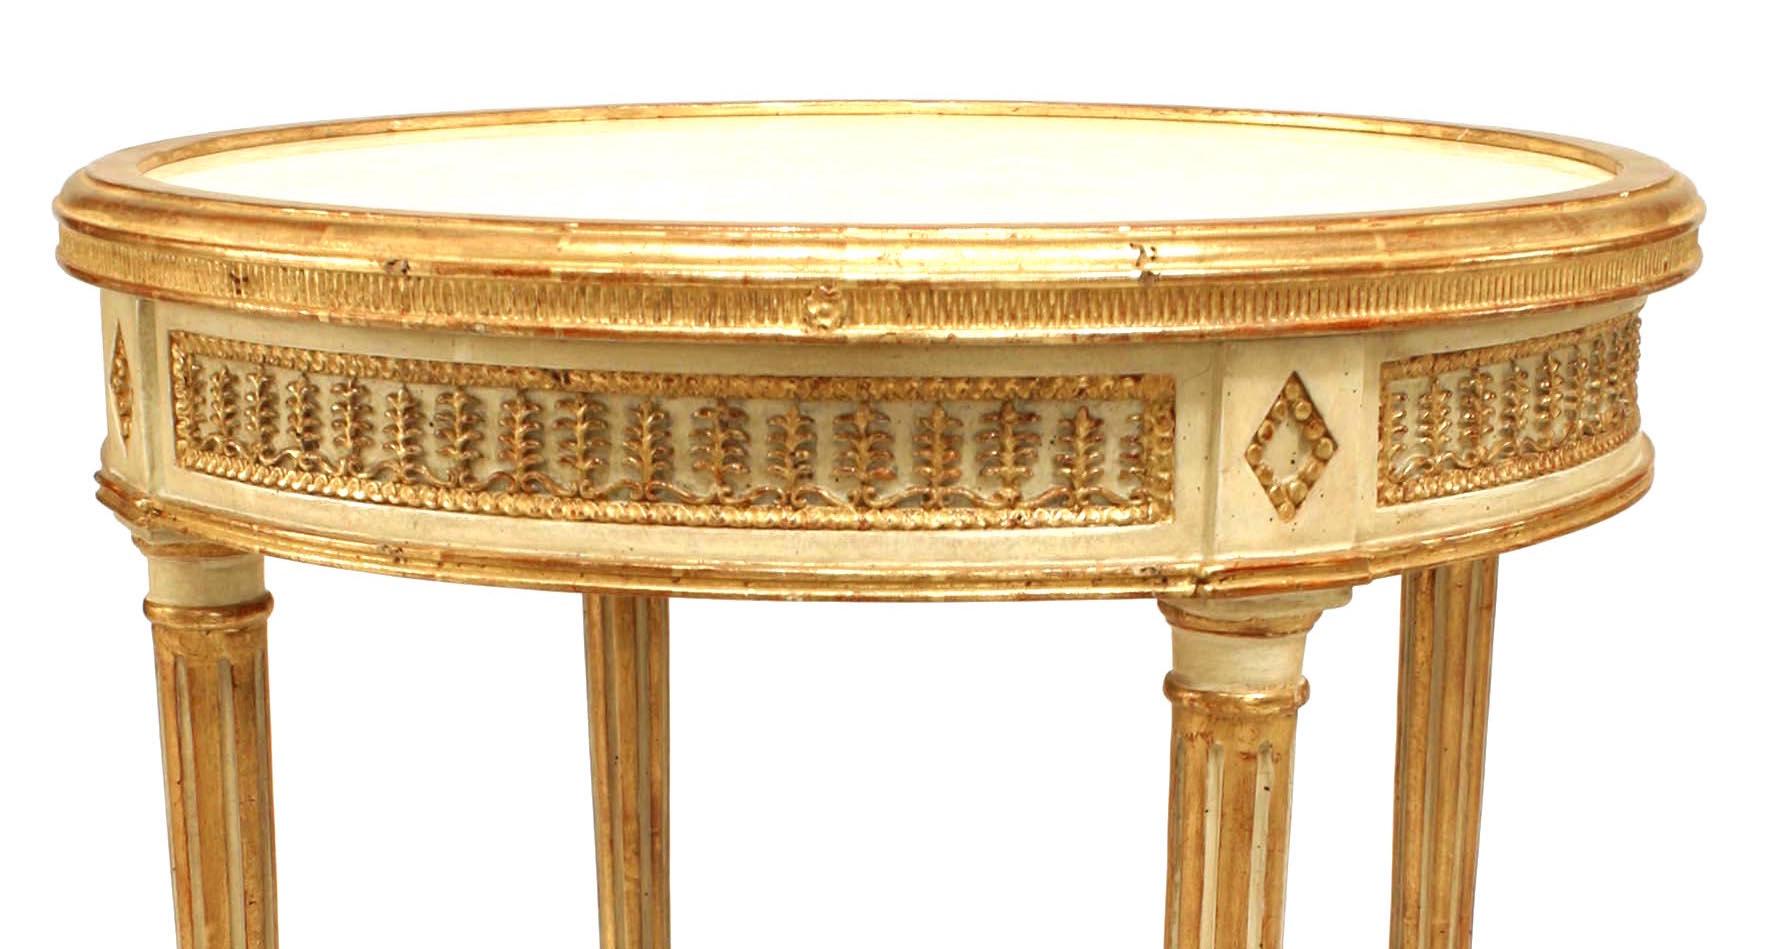 French Louis XVI-style (modern) white painted & gilt trim end table with a stretcher and carved acanthus leaf design apron with a round beige marble inset top.
